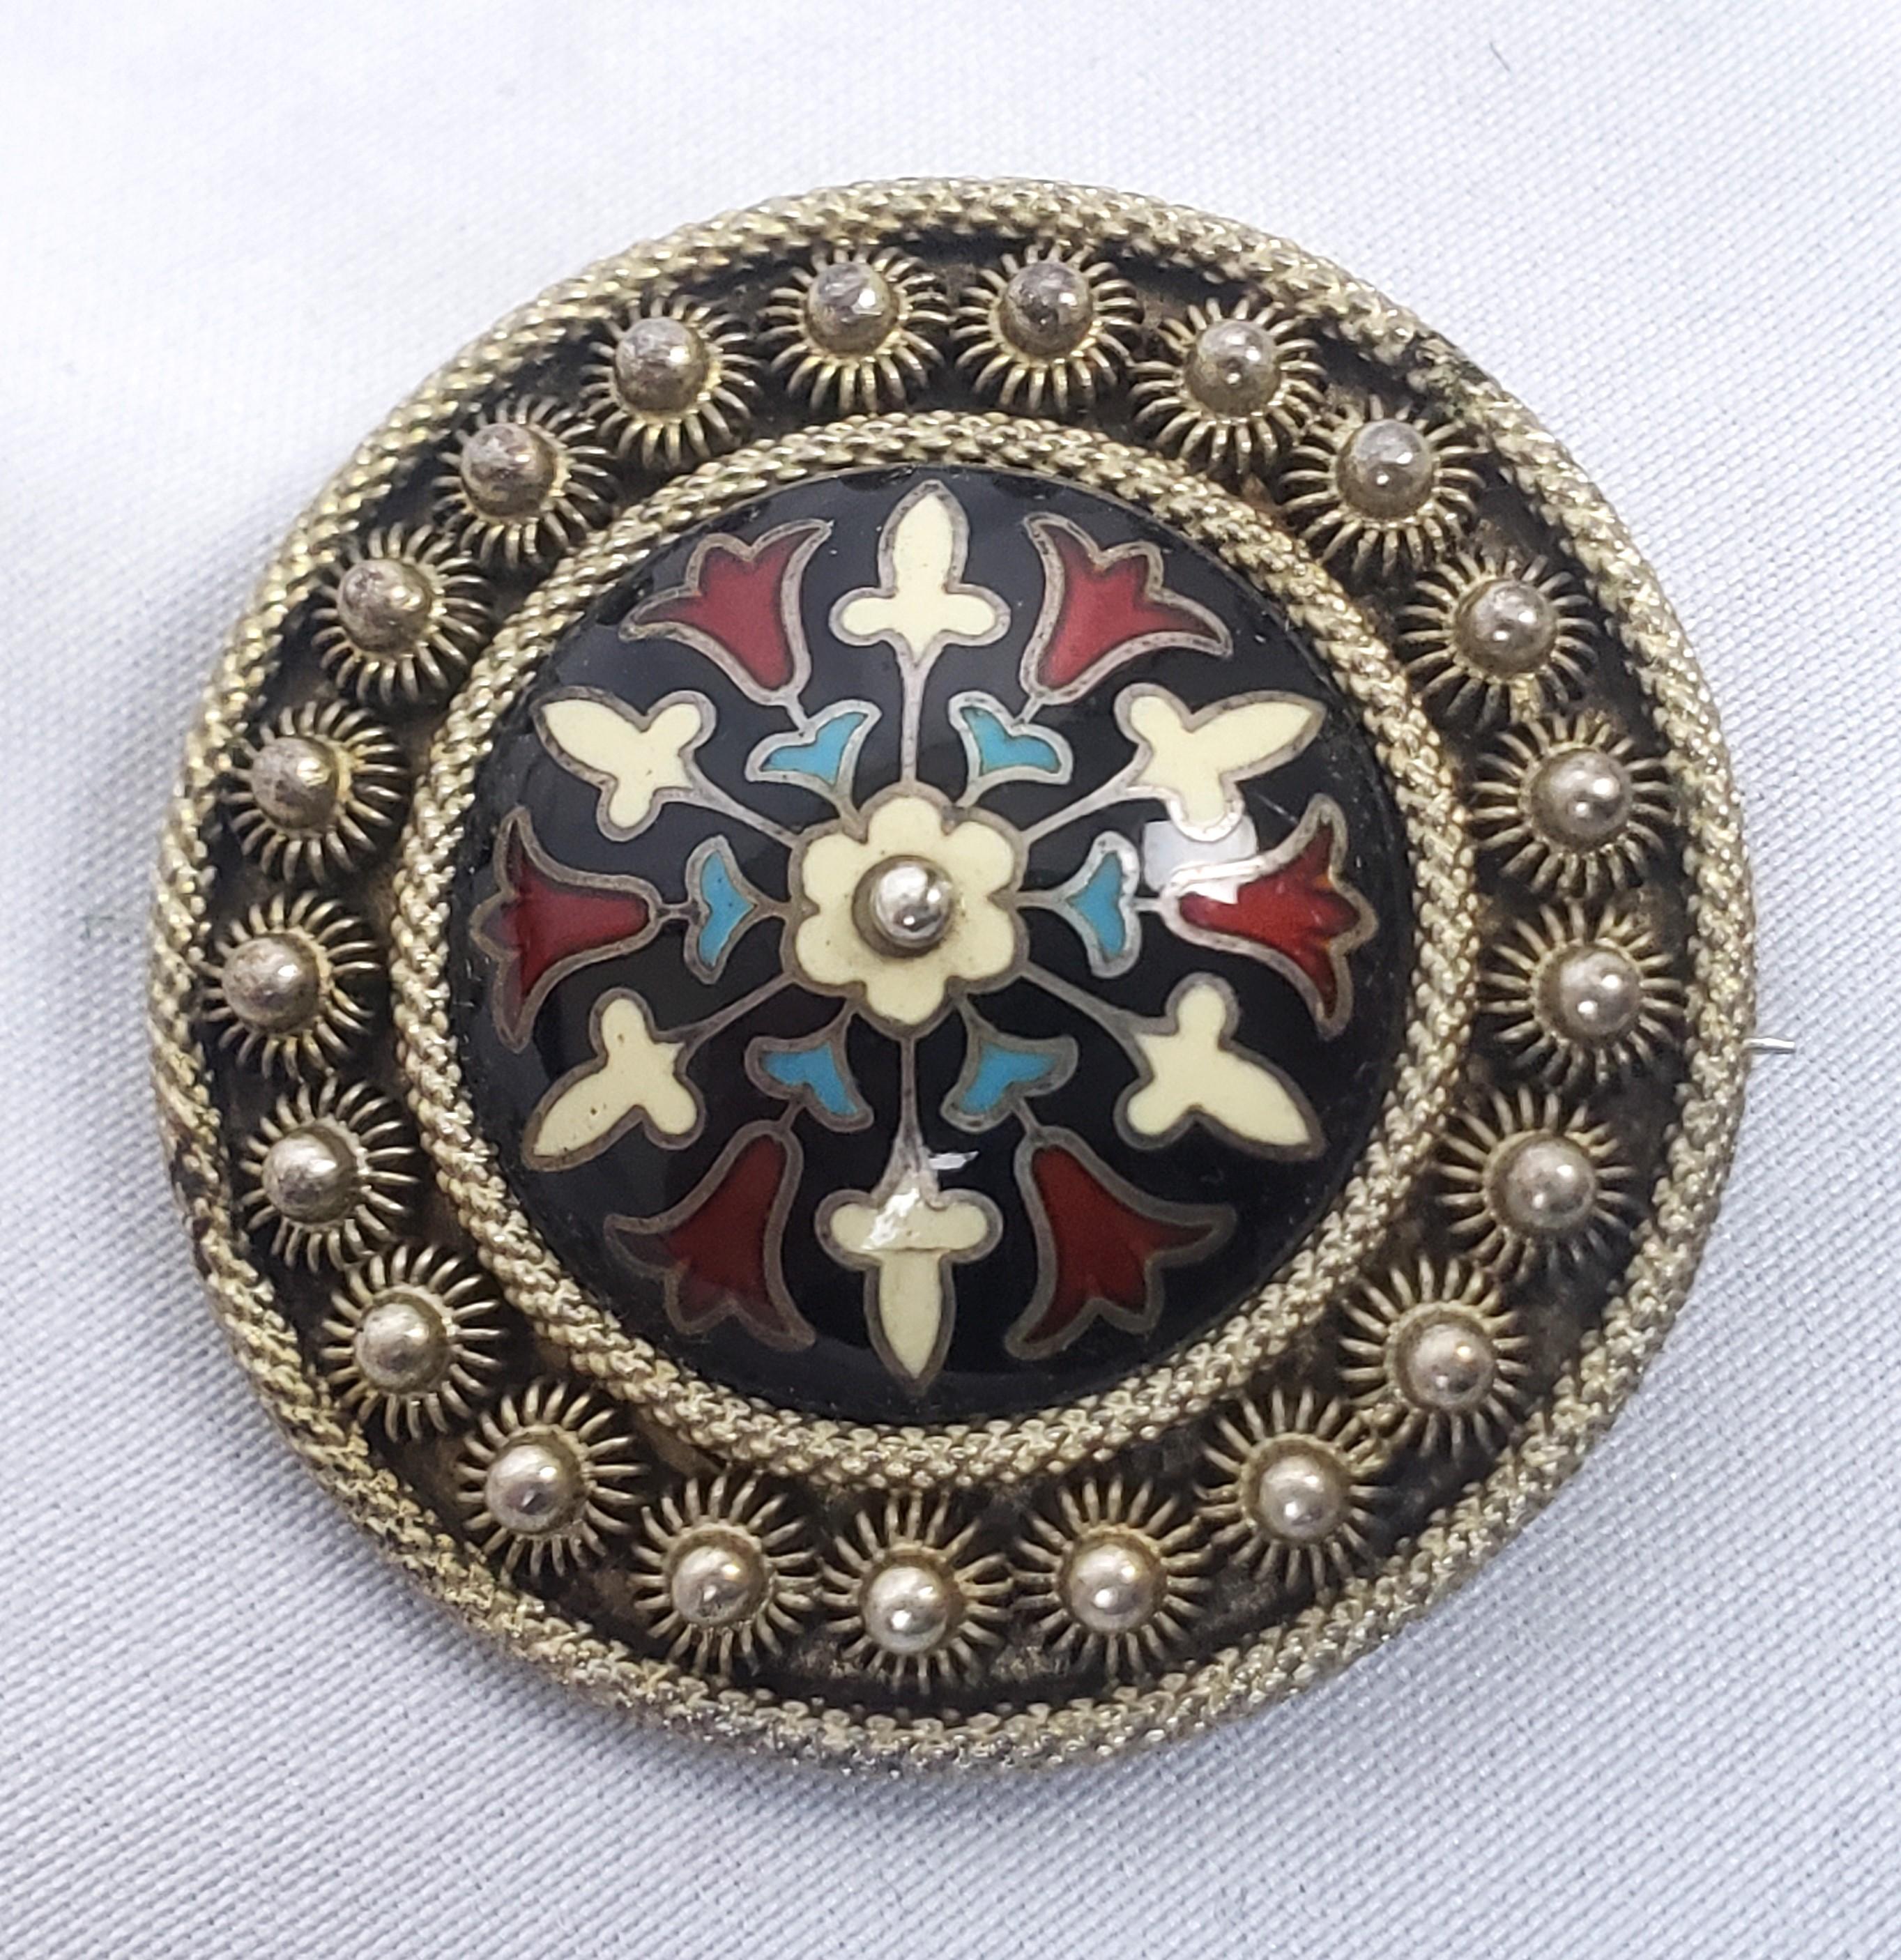 Antique Austrian Silver & Enamel Brooch with a Stylized Tulip Motif In Good Condition For Sale In Hamilton, Ontario